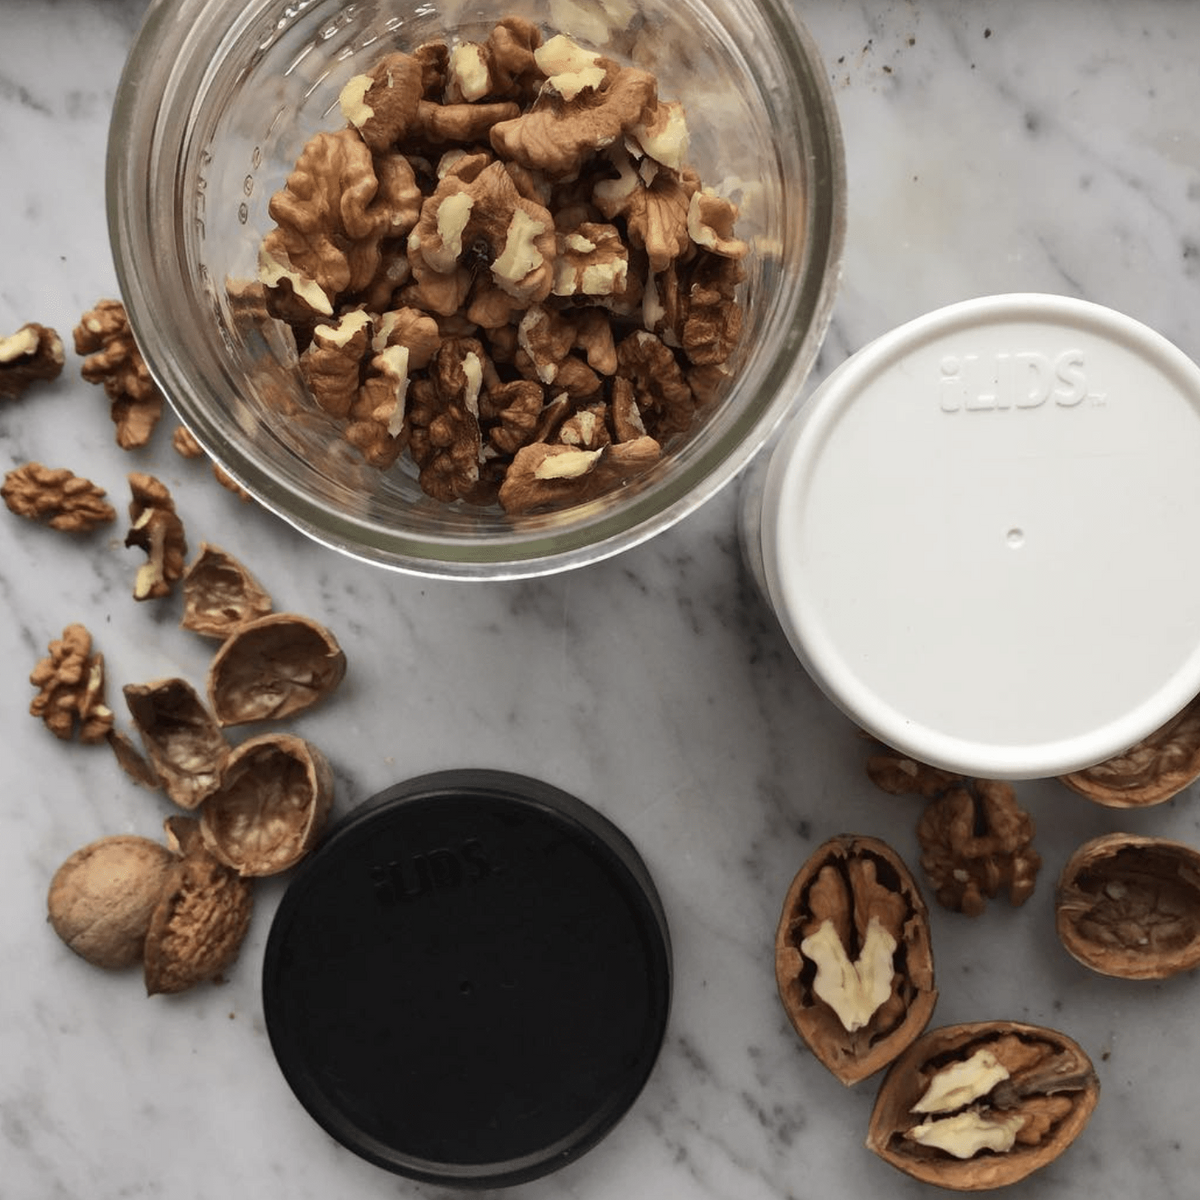 black and white storage lids sit on a counter with a glass jar full of nuts